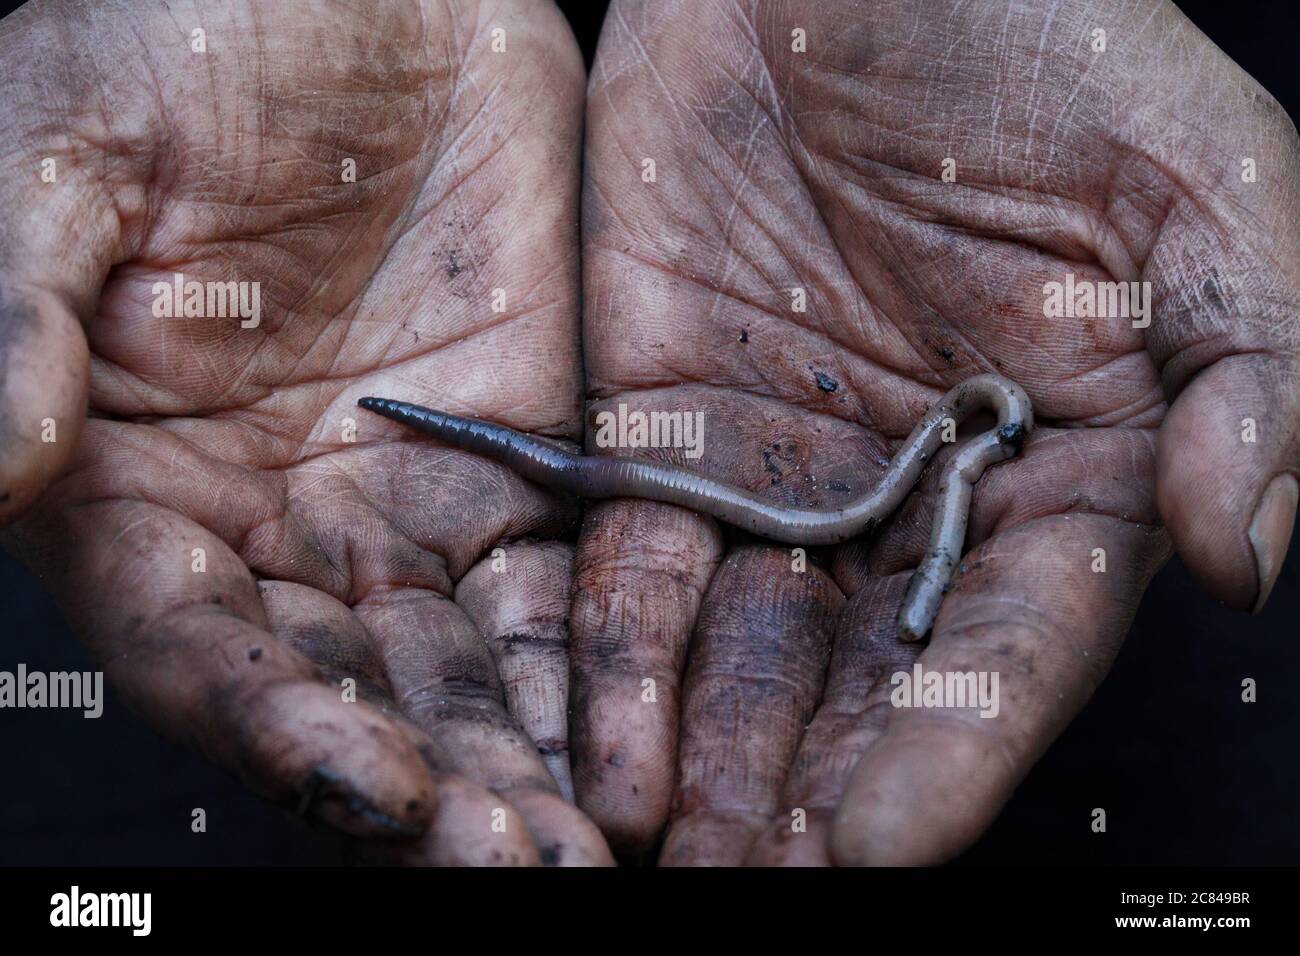 earthworm on muddy soil hands of a labourer worker close up Stock Photo